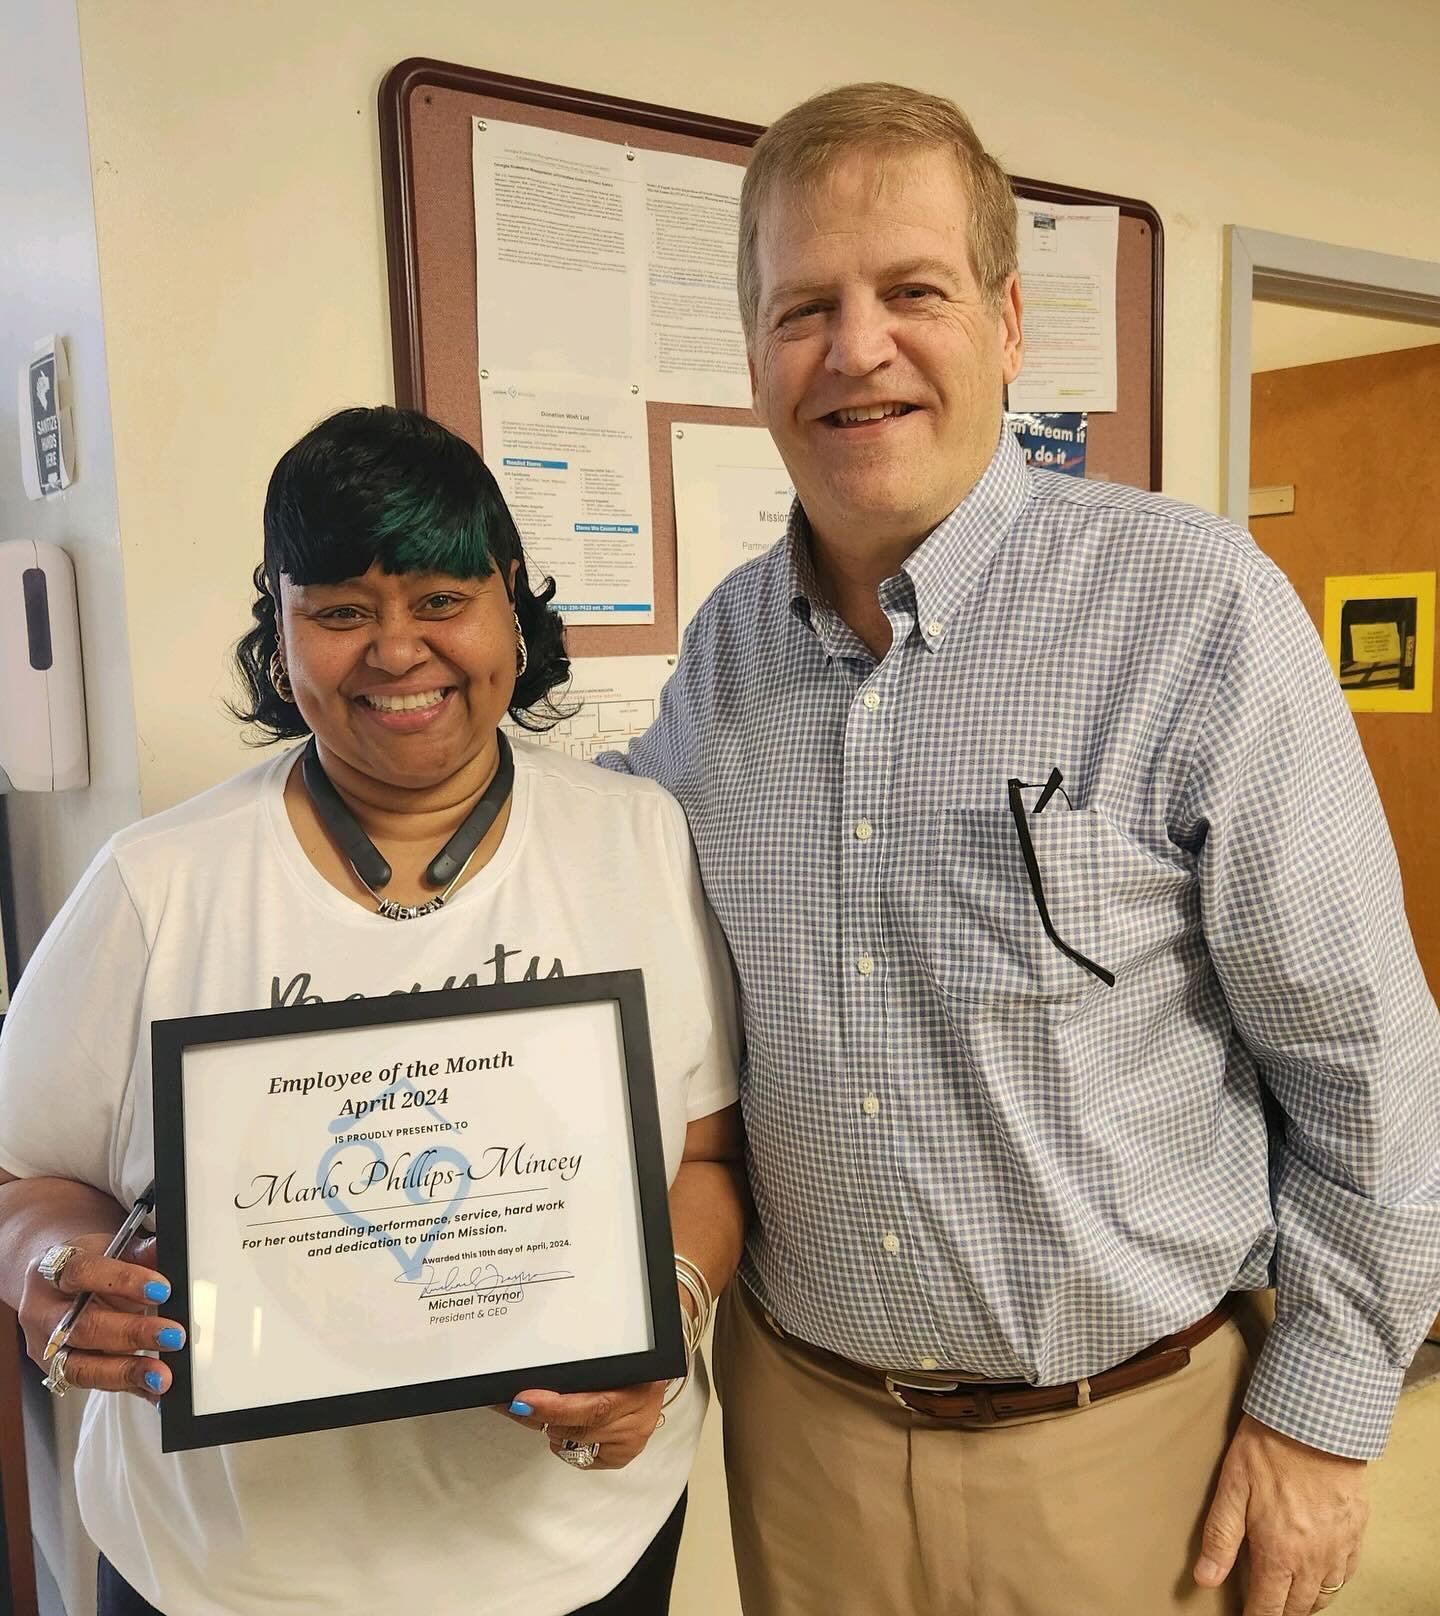 Our Employee of the Month for April is Marlo Phillips-Mincey!

Marlo stands out for her exemplary case management skills, consistent positivity, and robust collaboration with administrators, colleagues, and clients. Her dedication and creativity not 